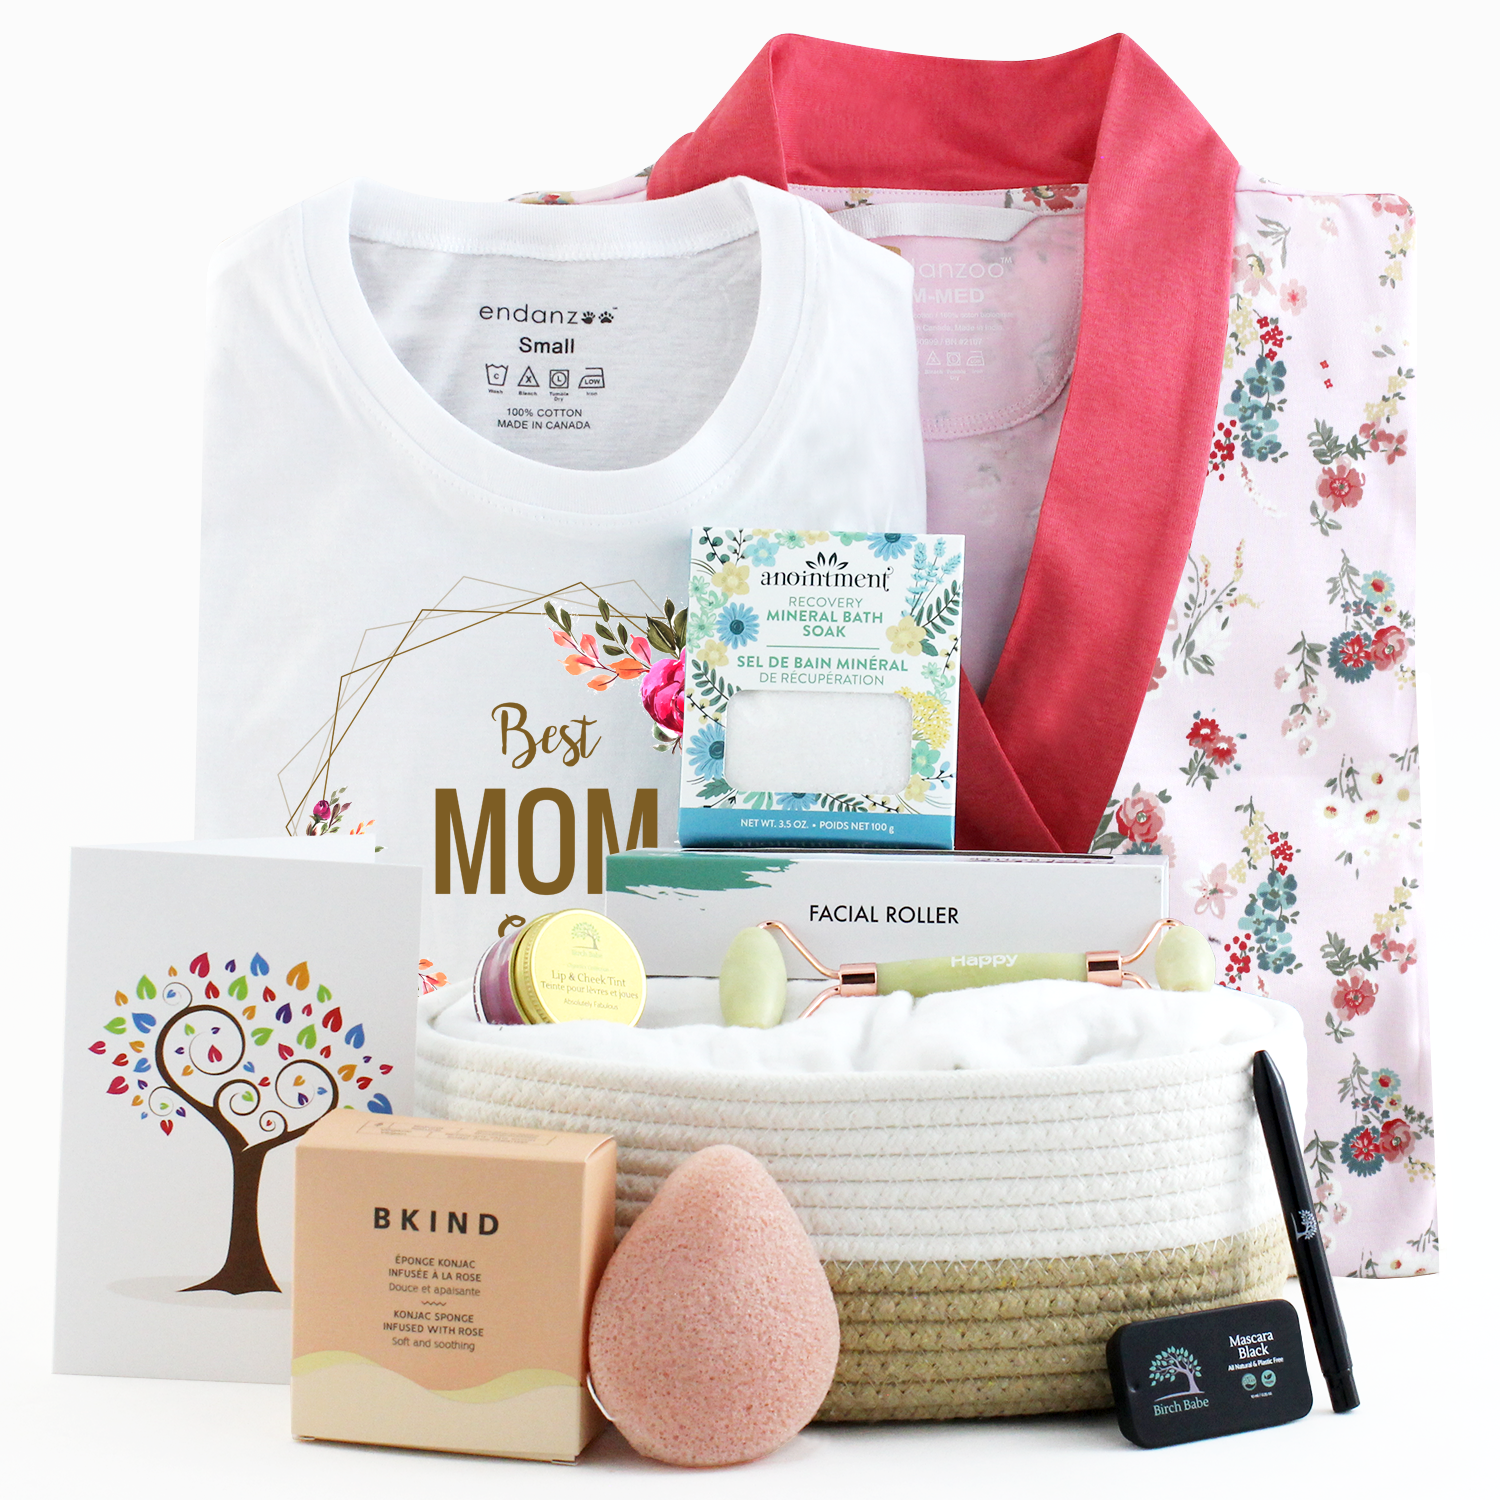 New Mom Gifts for Women, Care Package / Gift Basket Idea, Mom Who Just Gave Birth or Mother to Be or for A Baby Shower, Gender Reveal, Pregnancy or